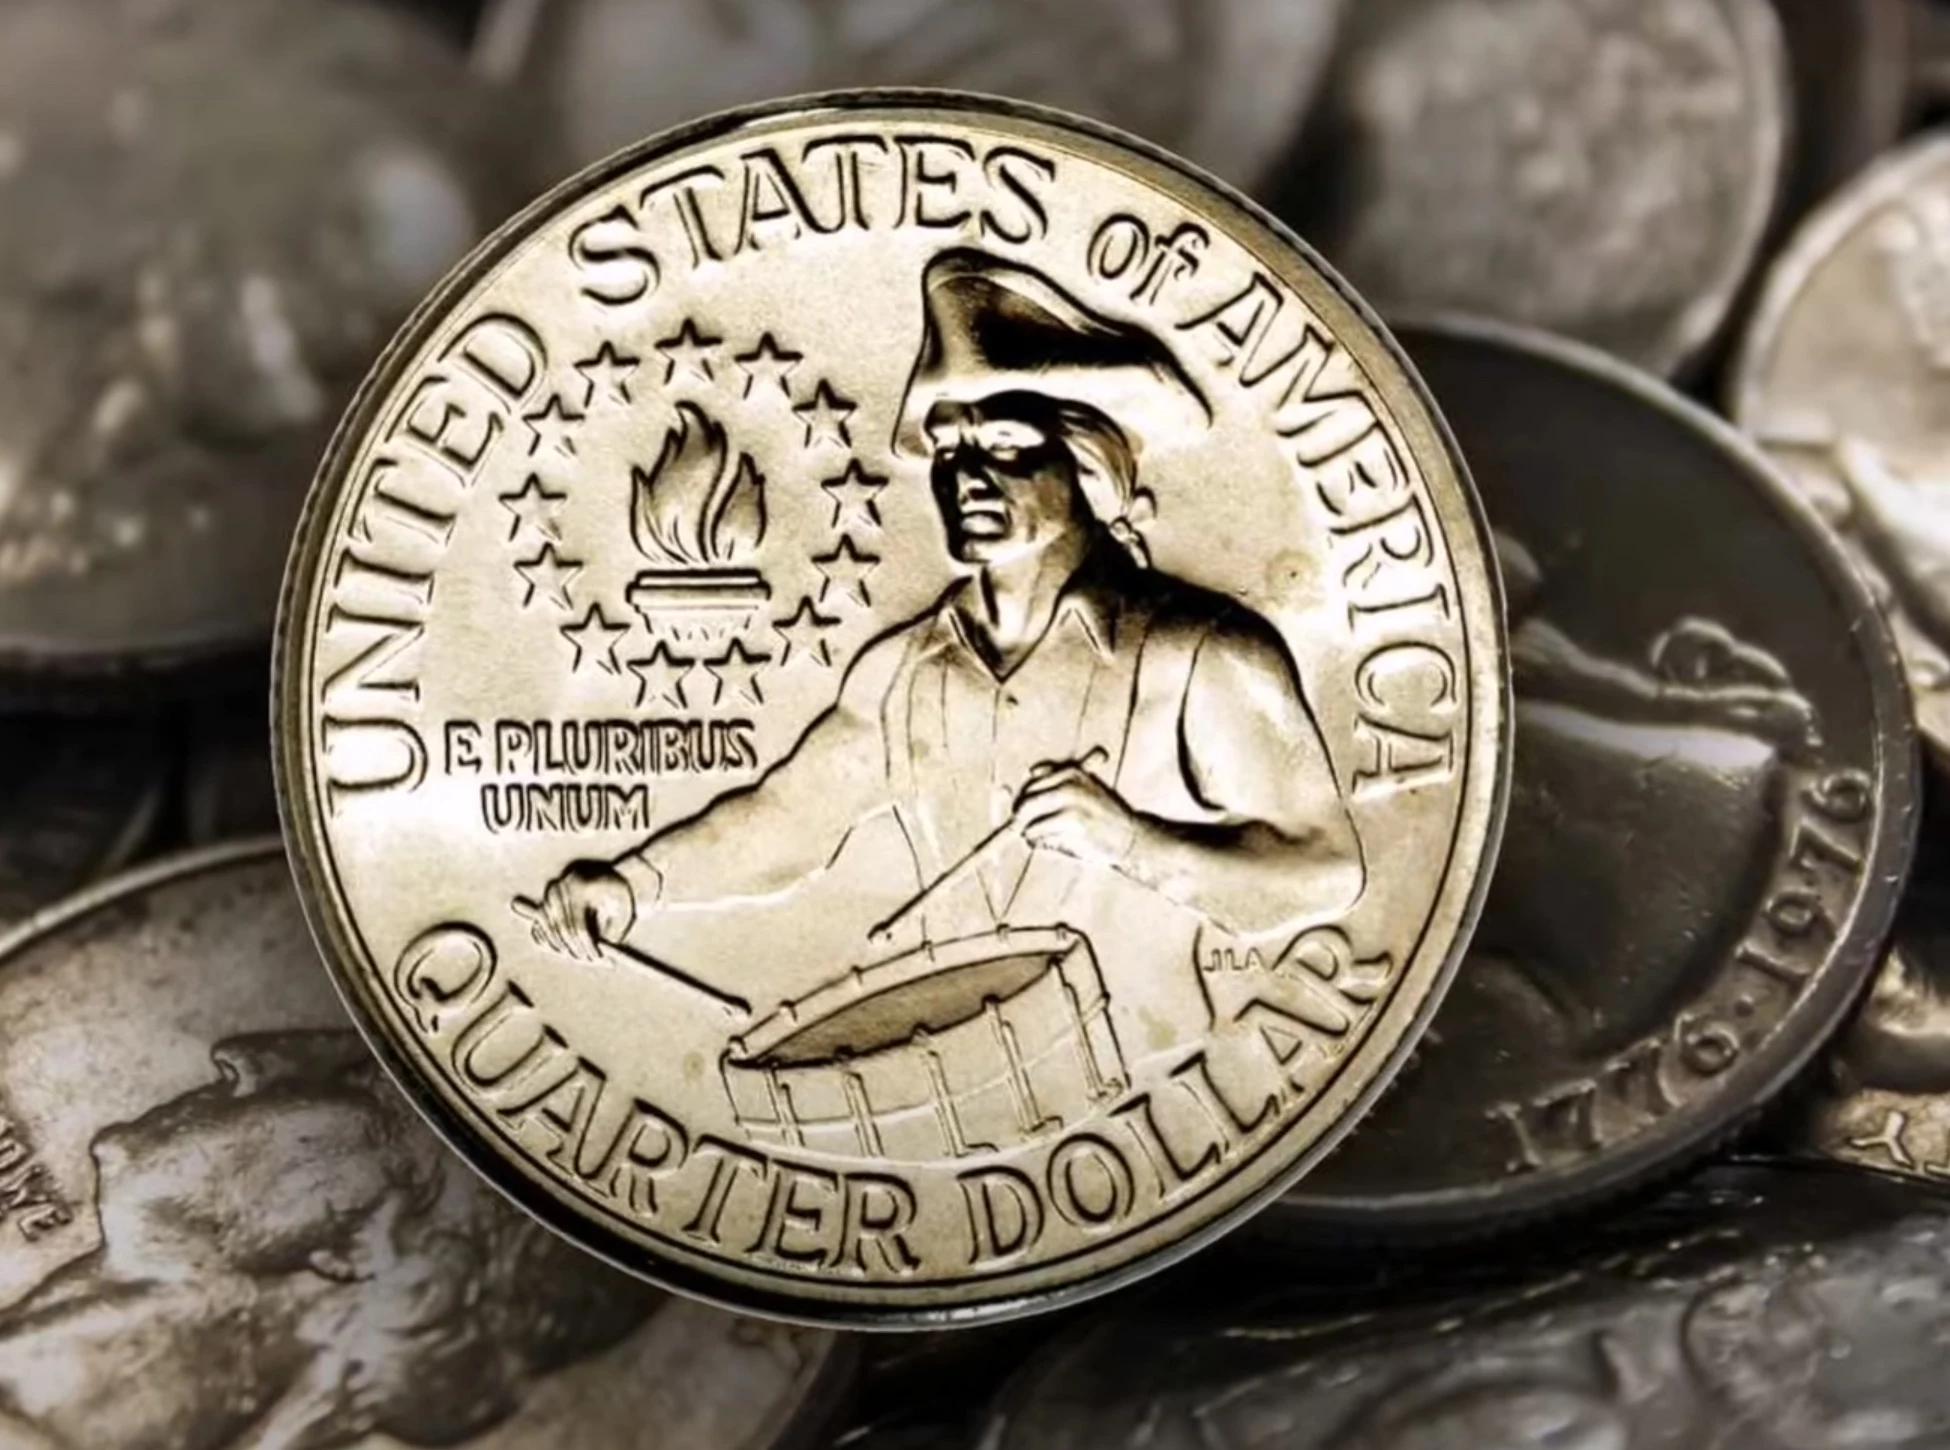 Check Your Change Idaho: These Quarters Are Worth Over $4,000